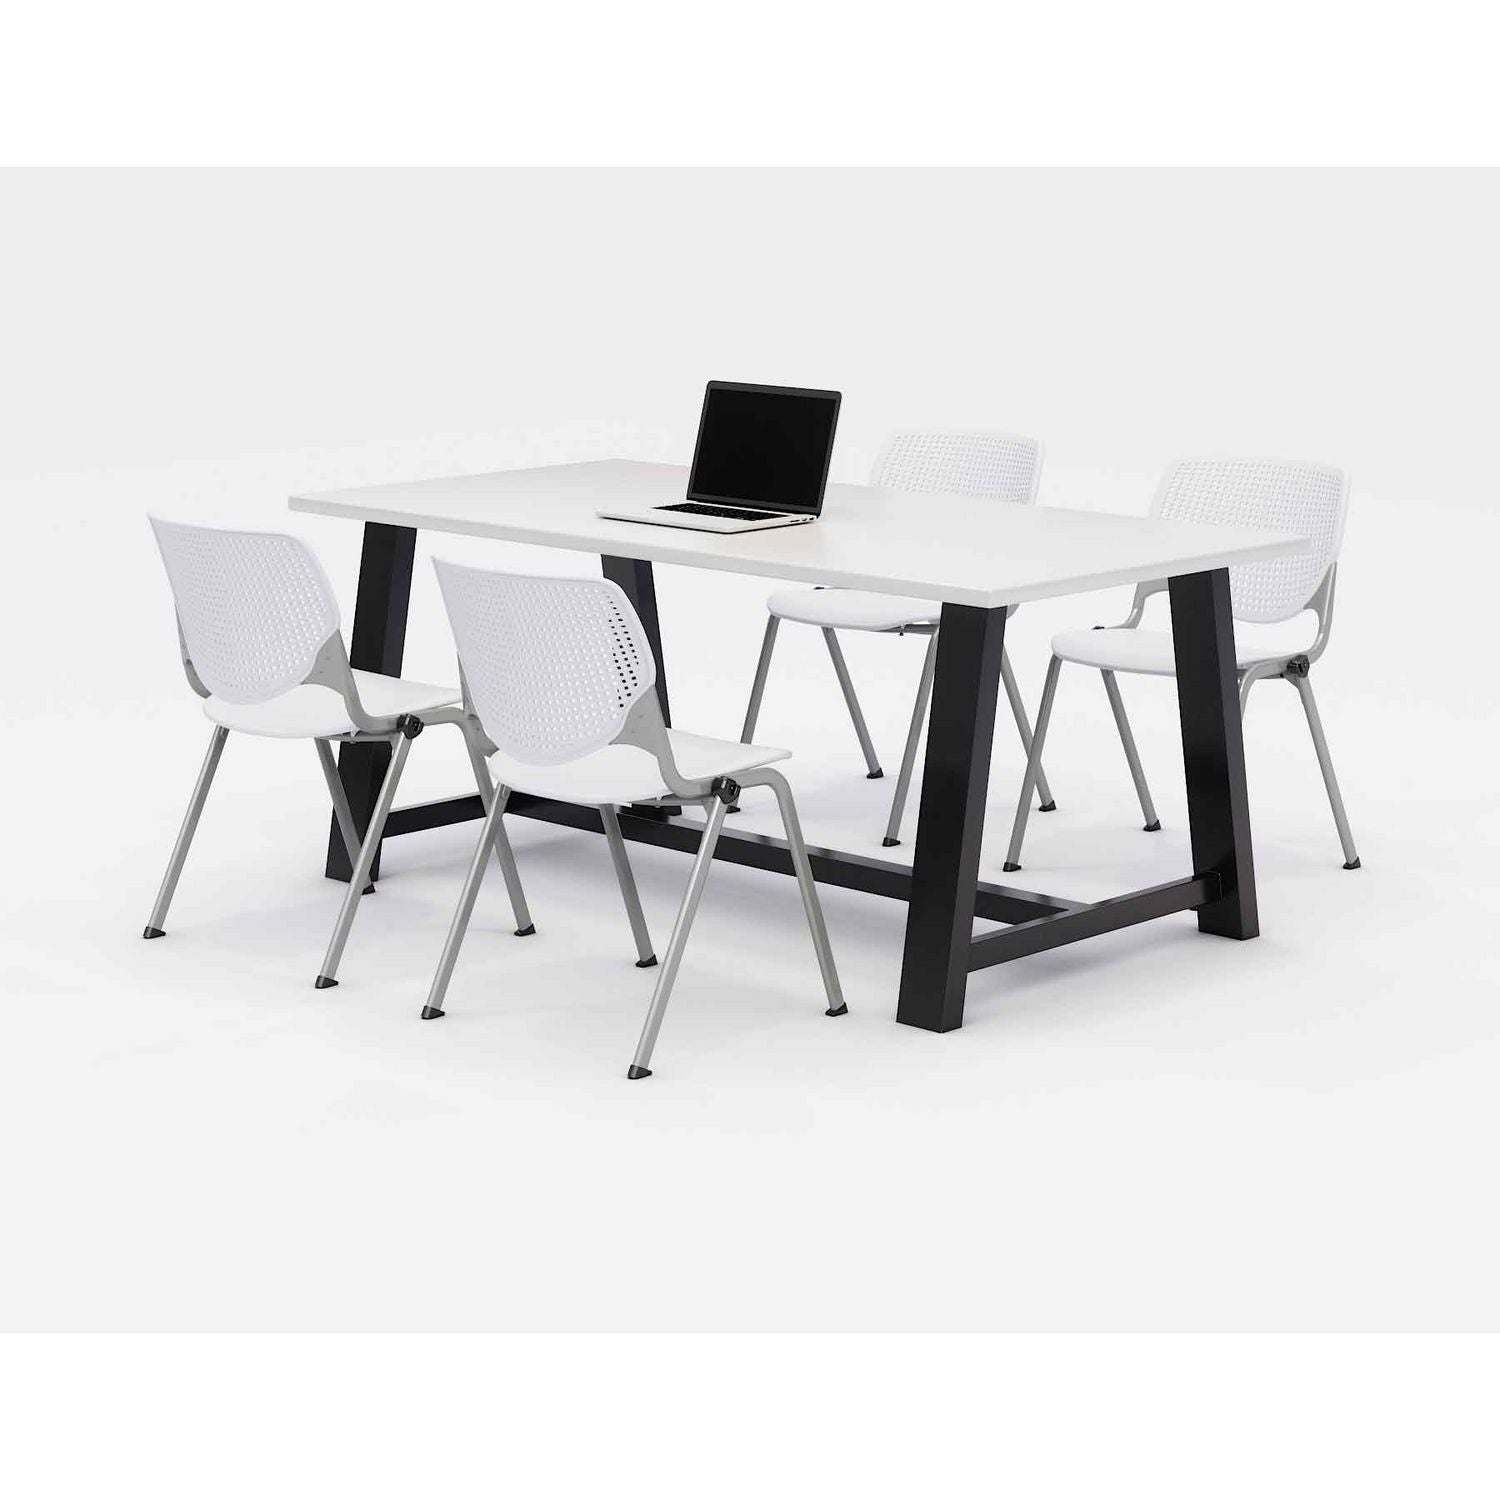 midtown-dining-table-with-four-white-kool-series-chairs-36-x-72-x-30-designer-white-ships-in-4-6-business-days_kfi840031900265 - 1